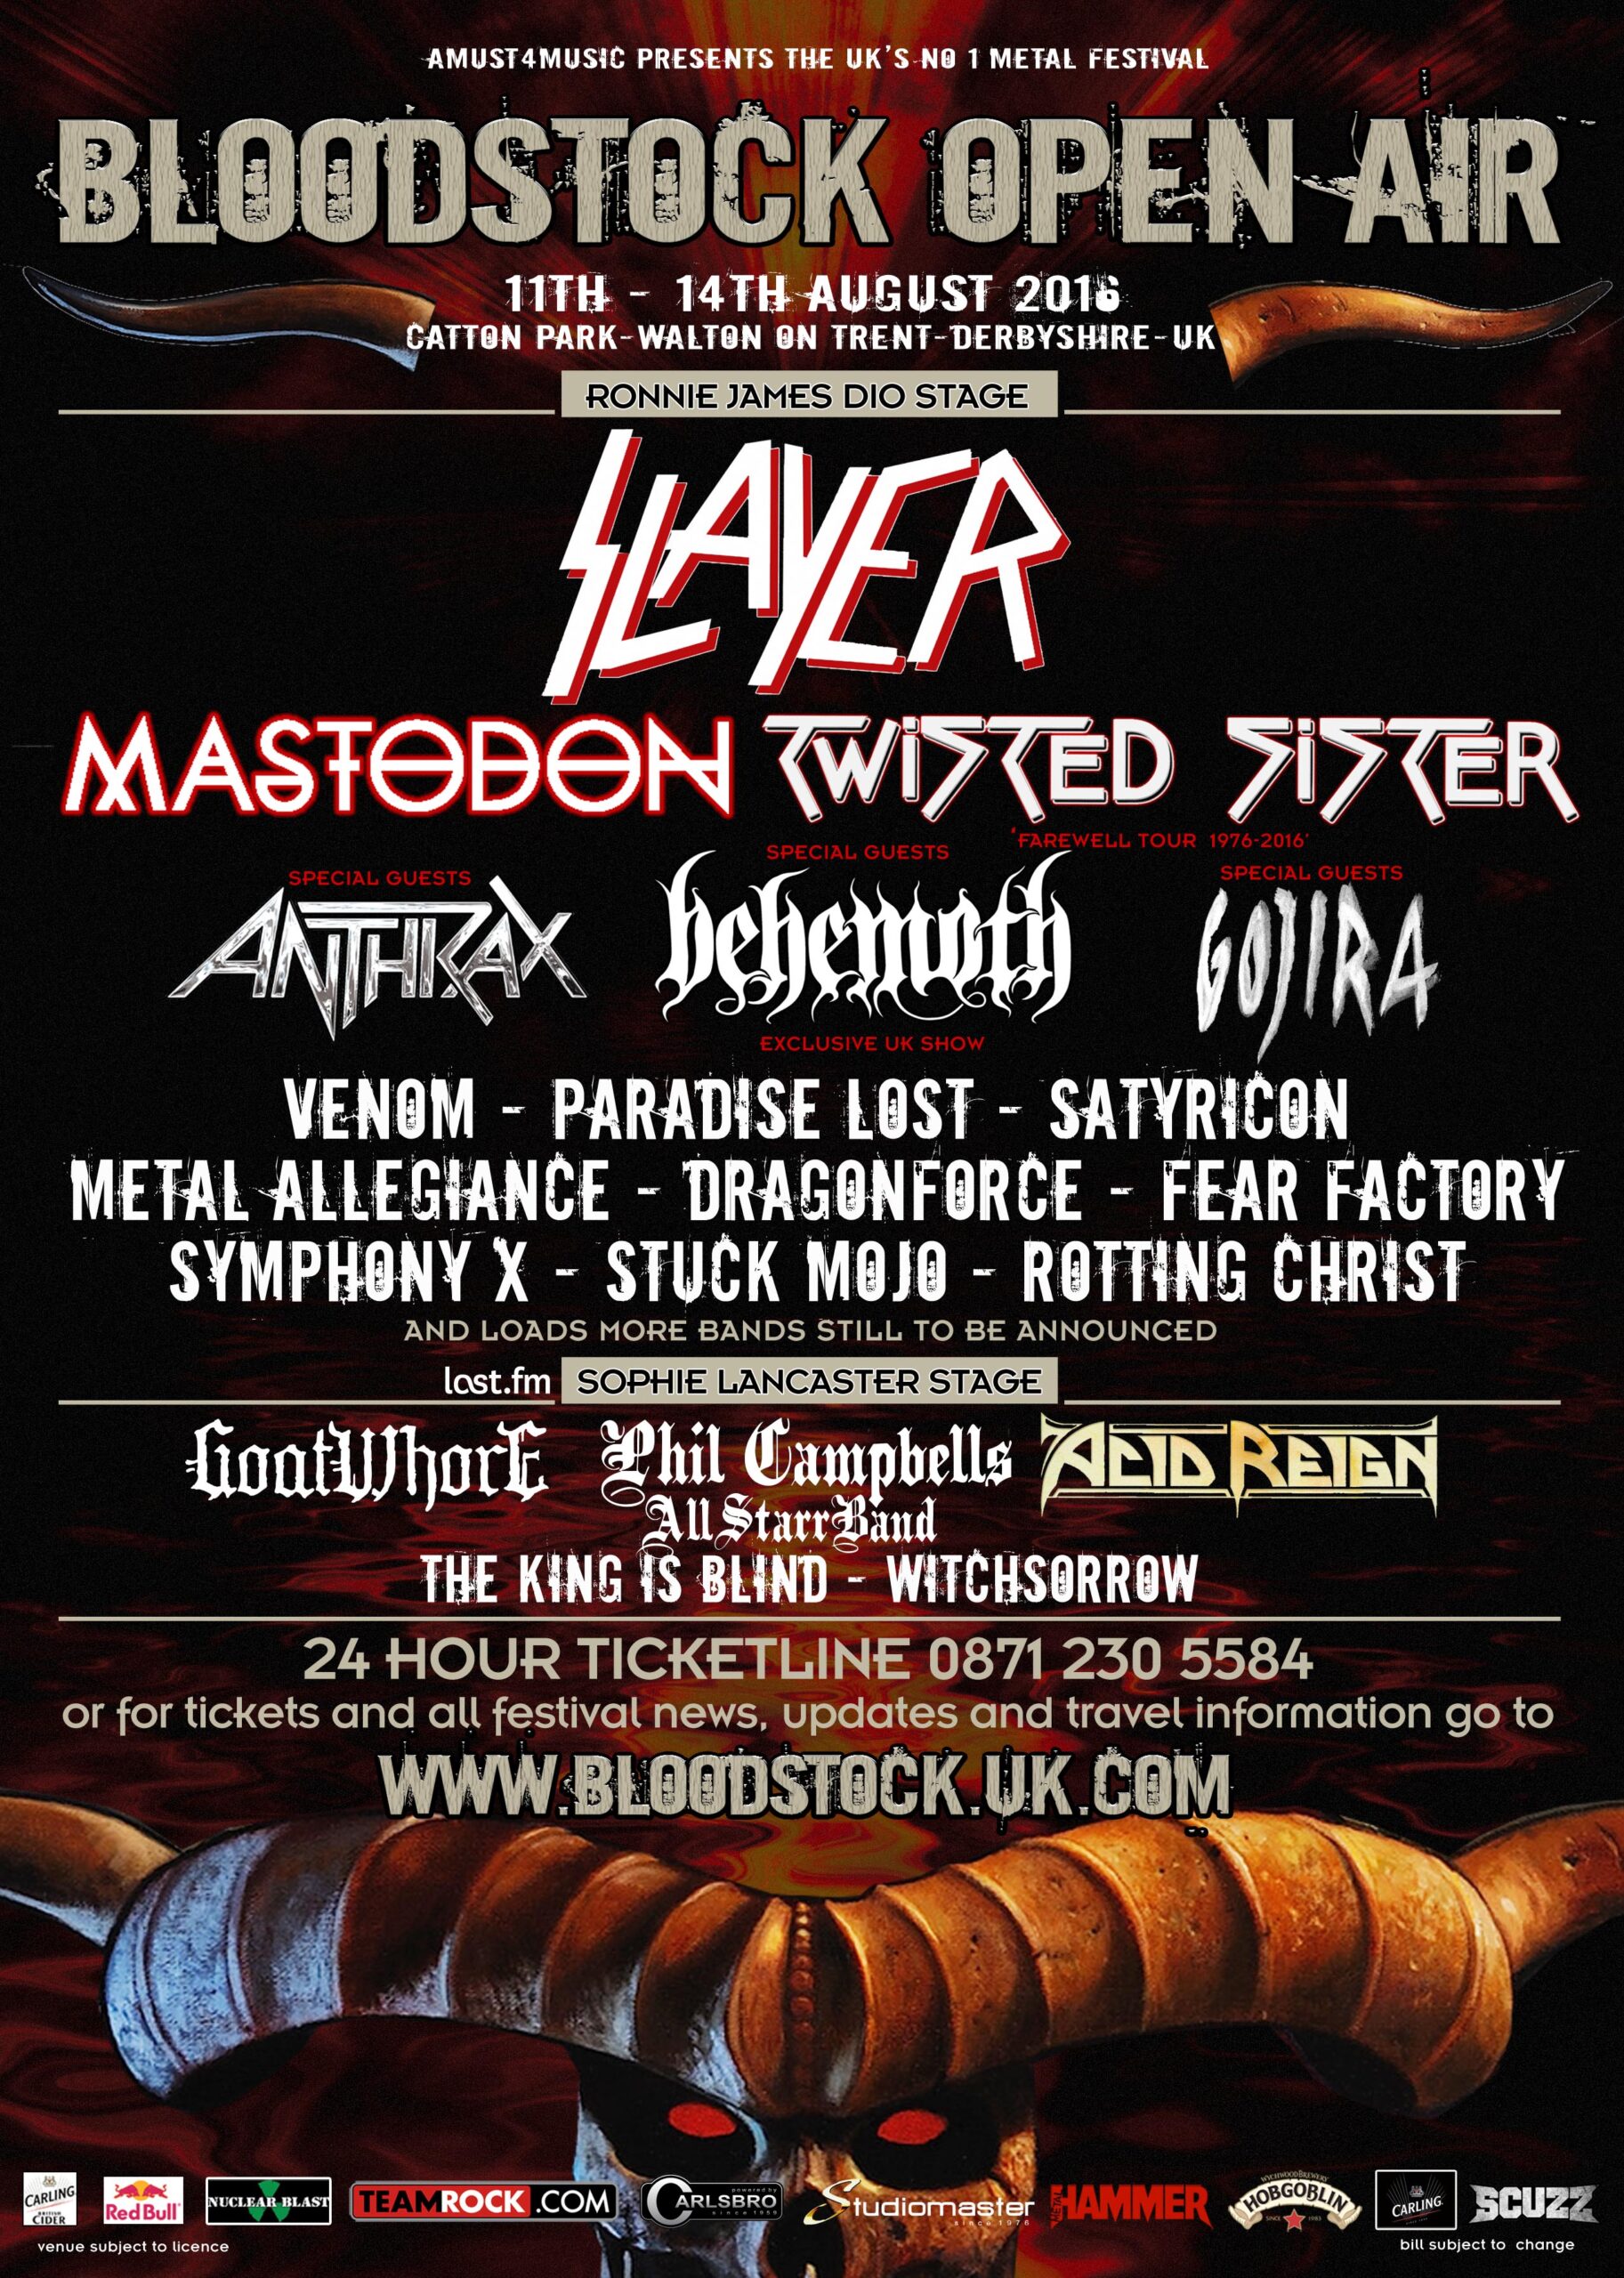 Bloodstock Adds More Bands